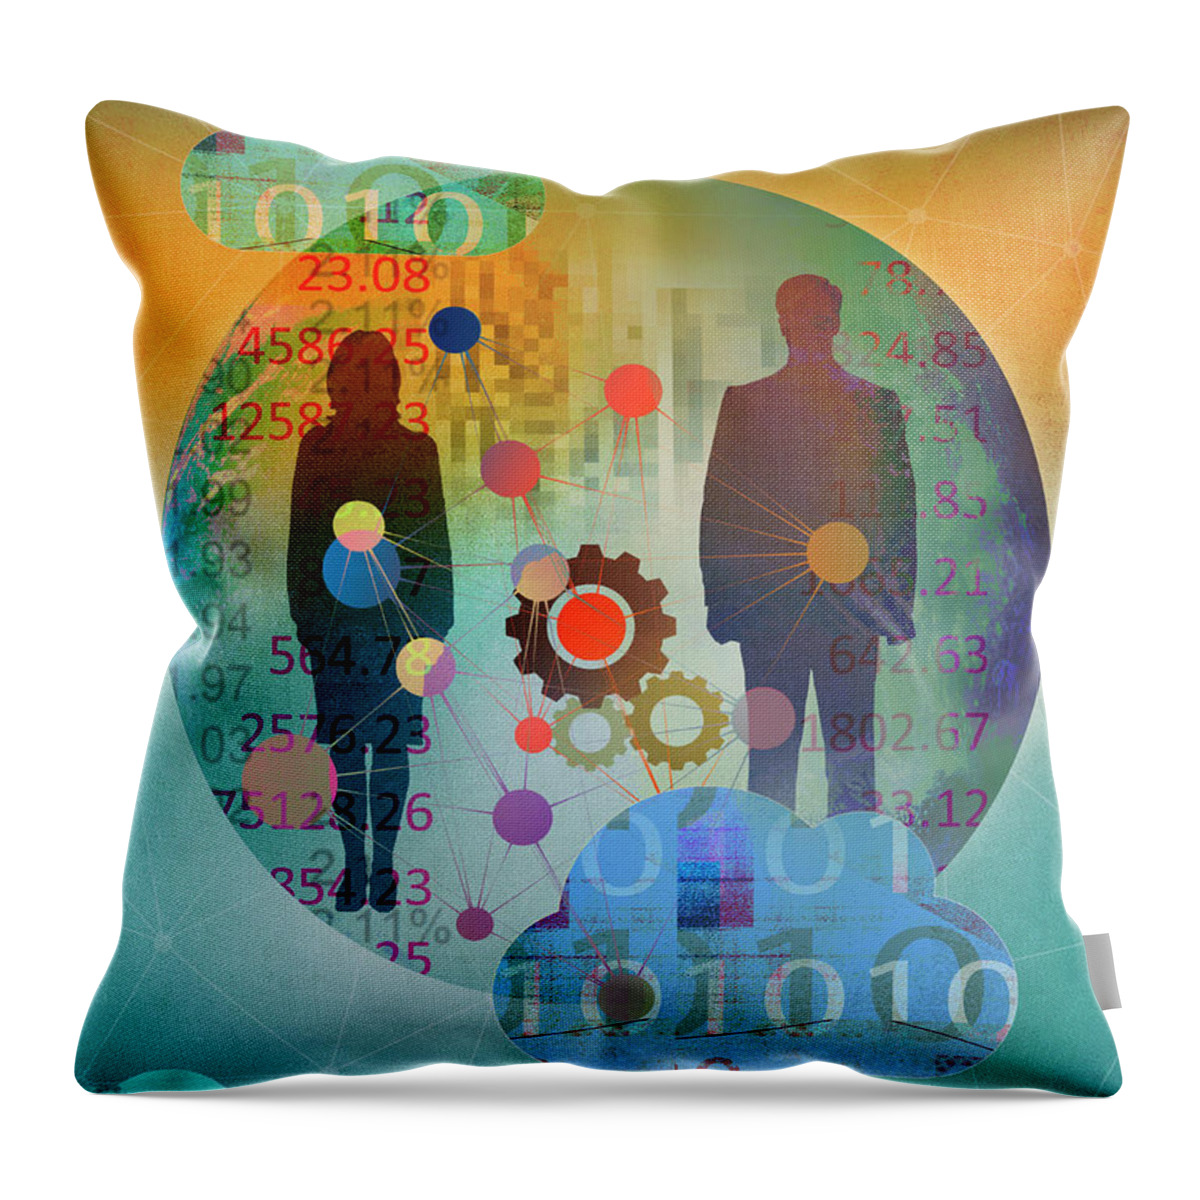 Access Throw Pillow featuring the photograph Cloud Computing Connecting Businessman by Ikon Images